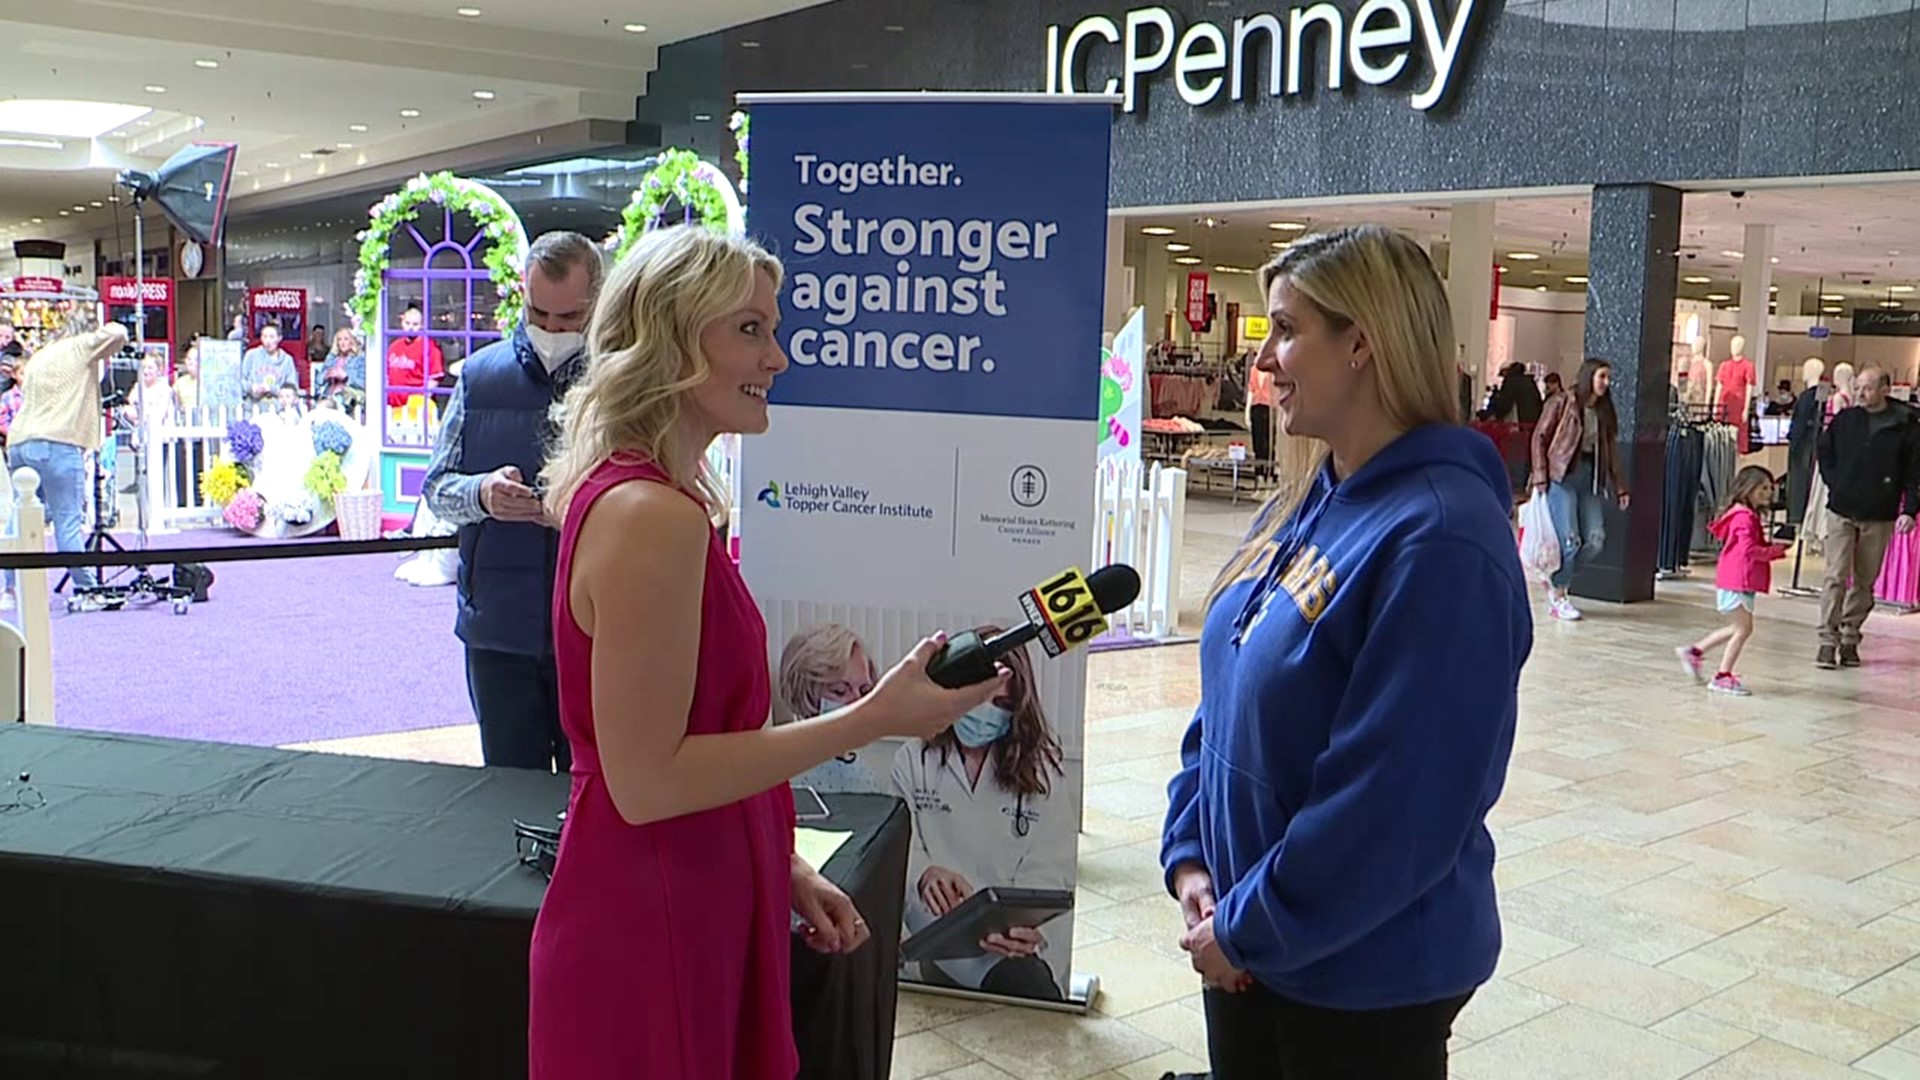 Sunday was the final day for a Regional American Cancer Society Telethon in Dickson City.